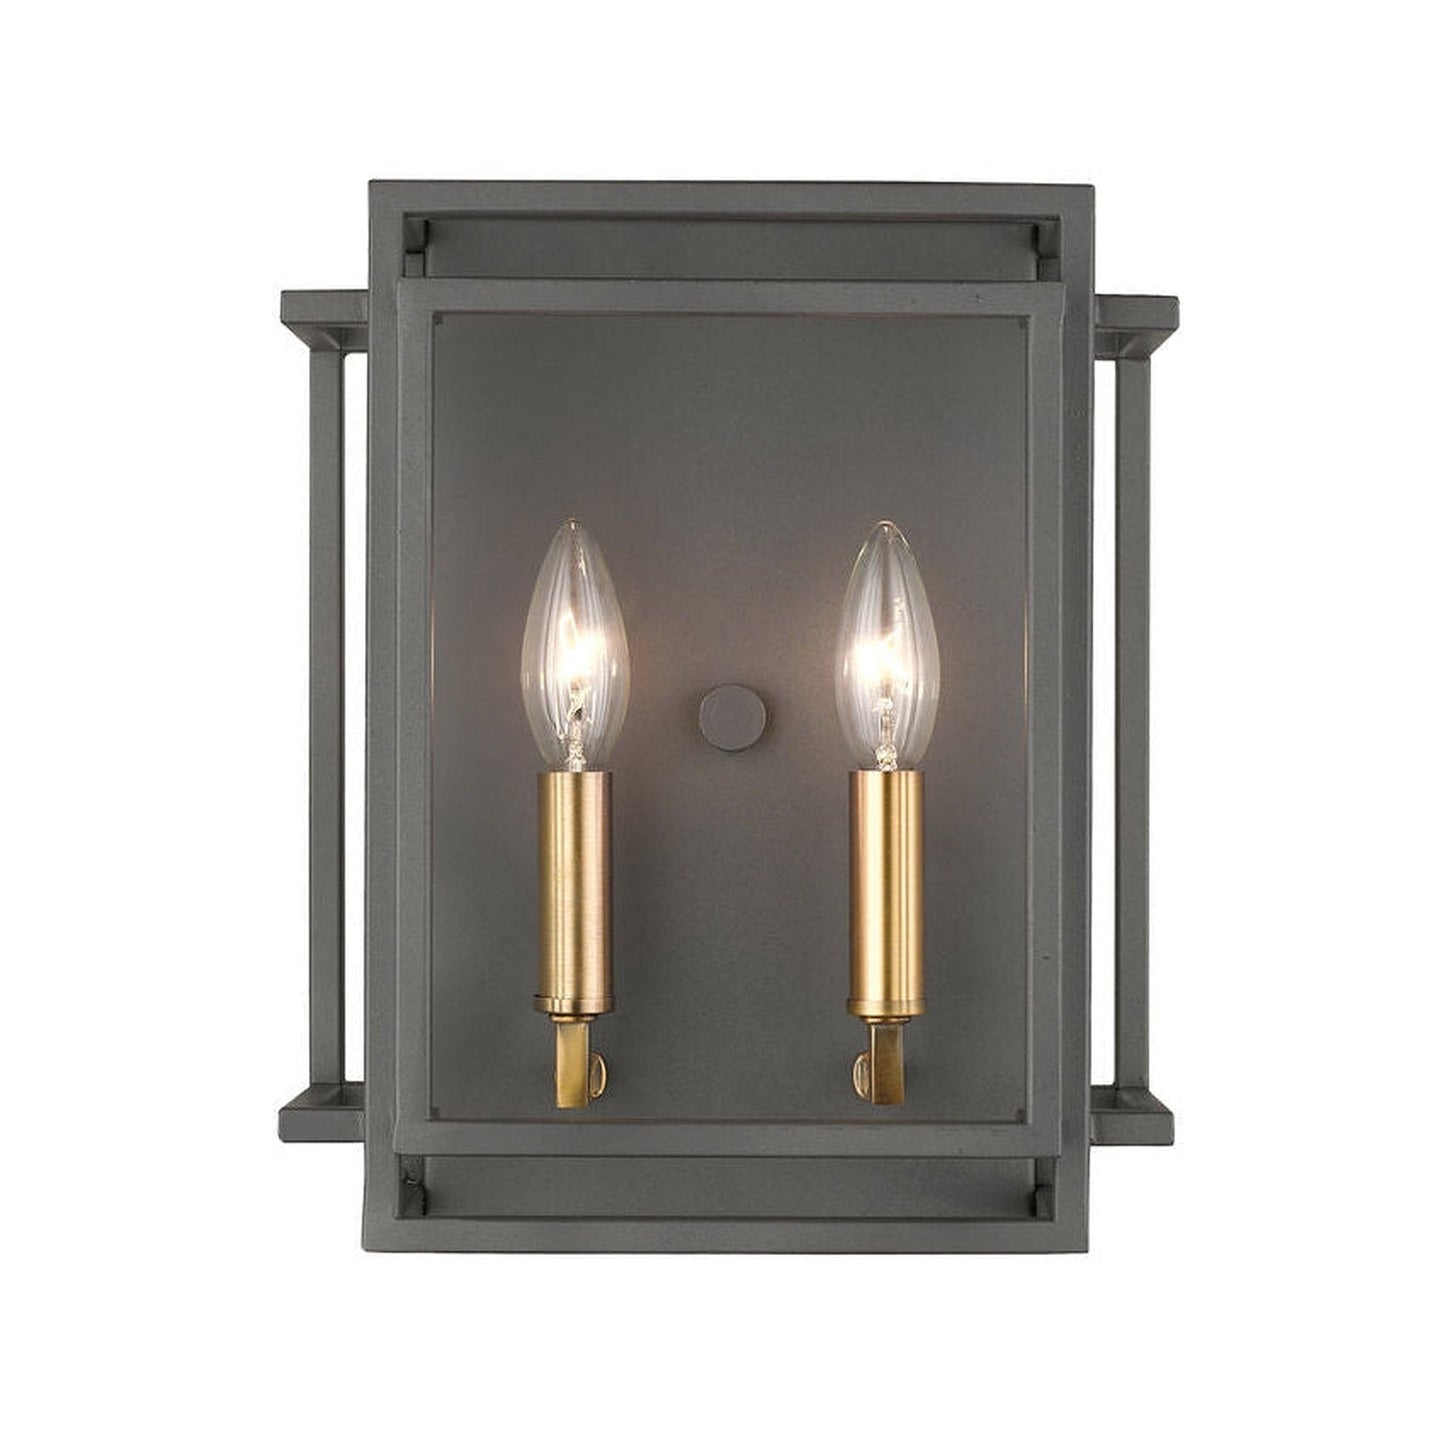 Z-Lite Titania 10" 2-Light Bronze and Olde Brass Wall Sconce